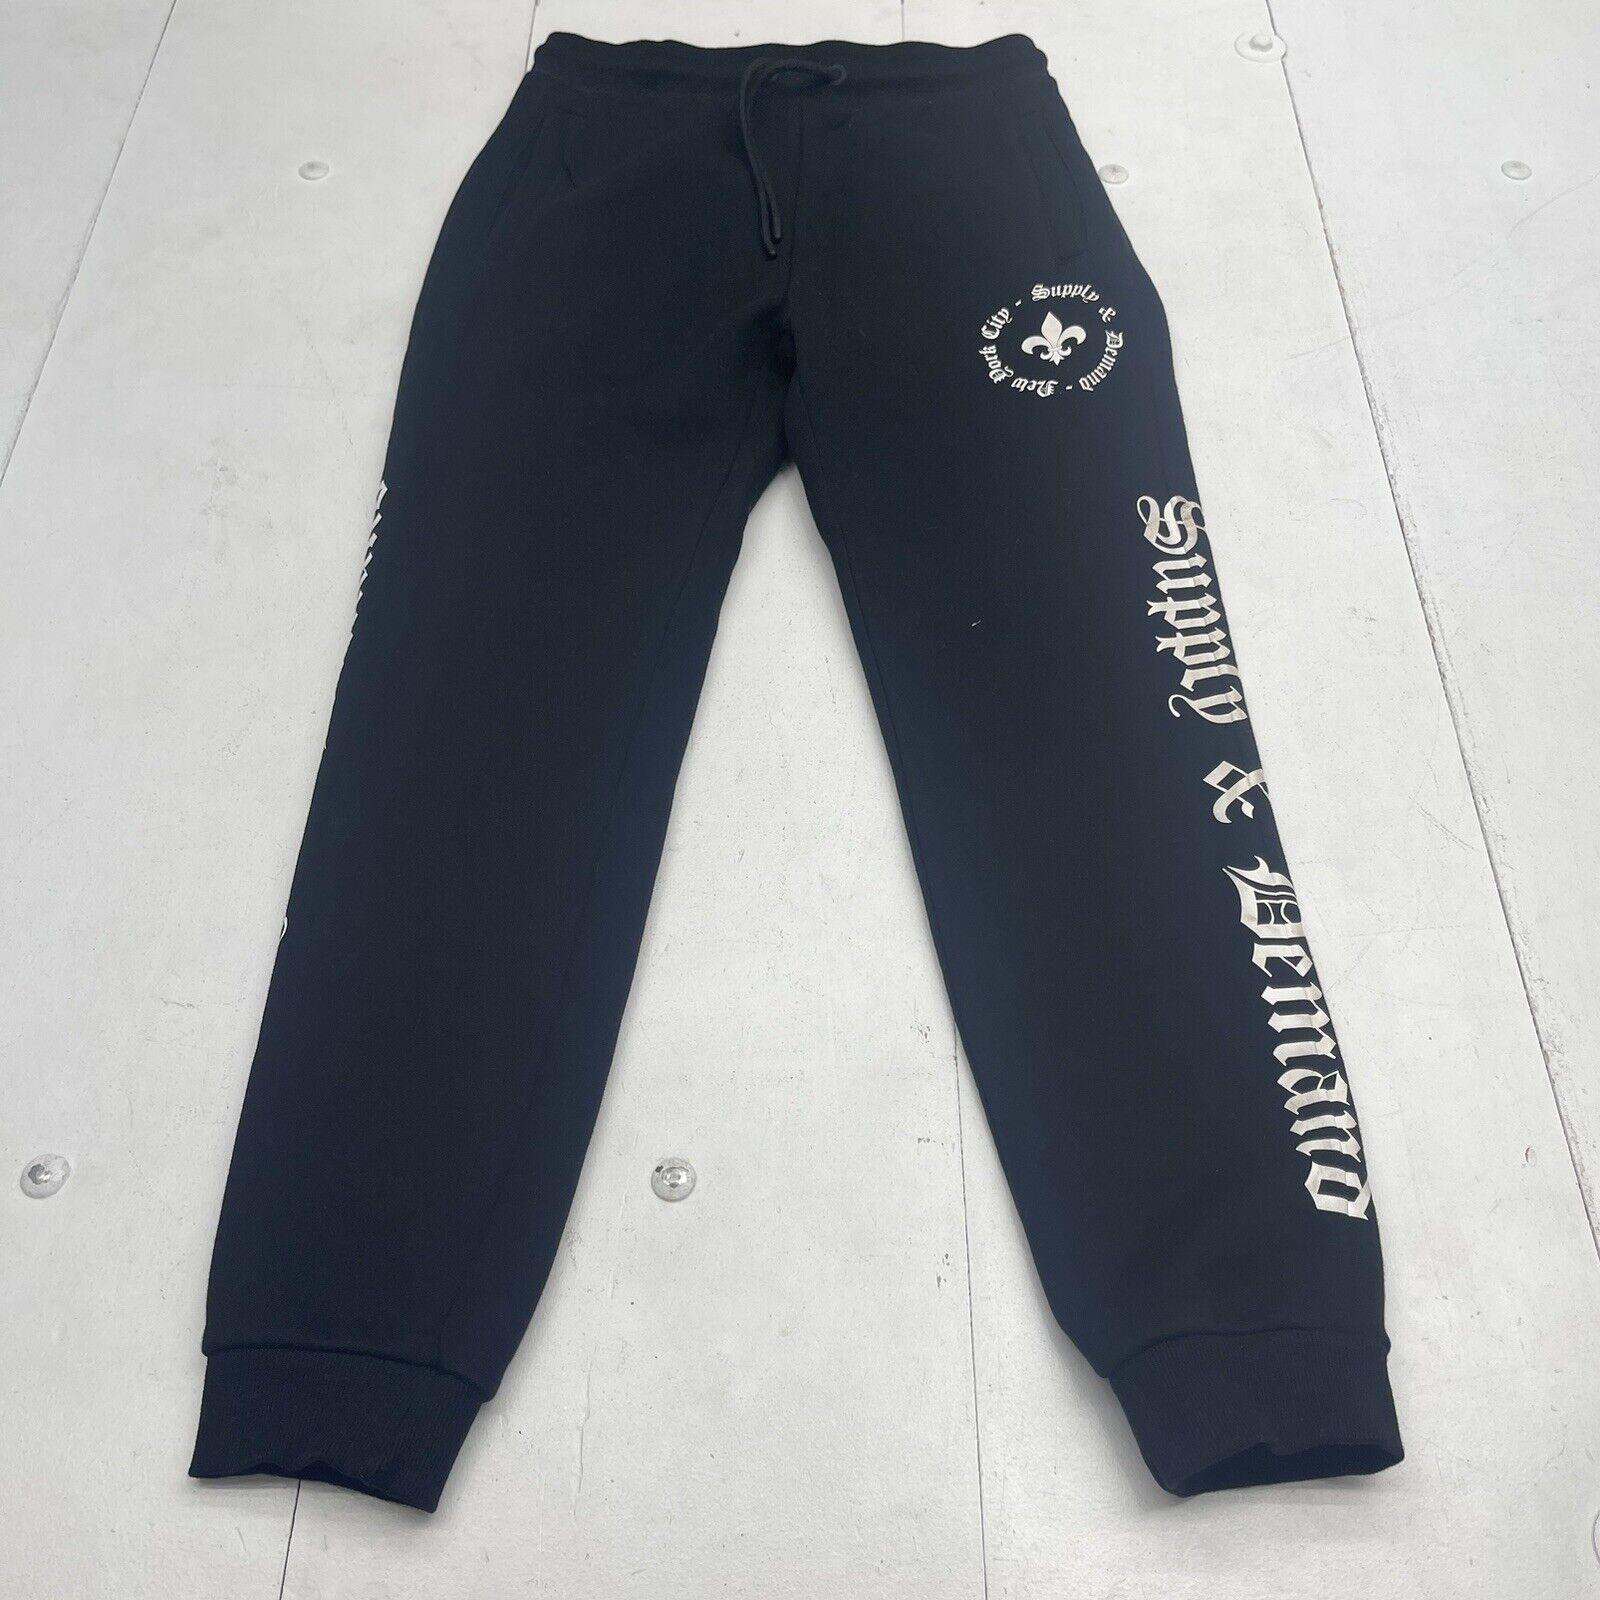 Supply & Demand Black Lawrence Joggers Mens Size Large New Defect